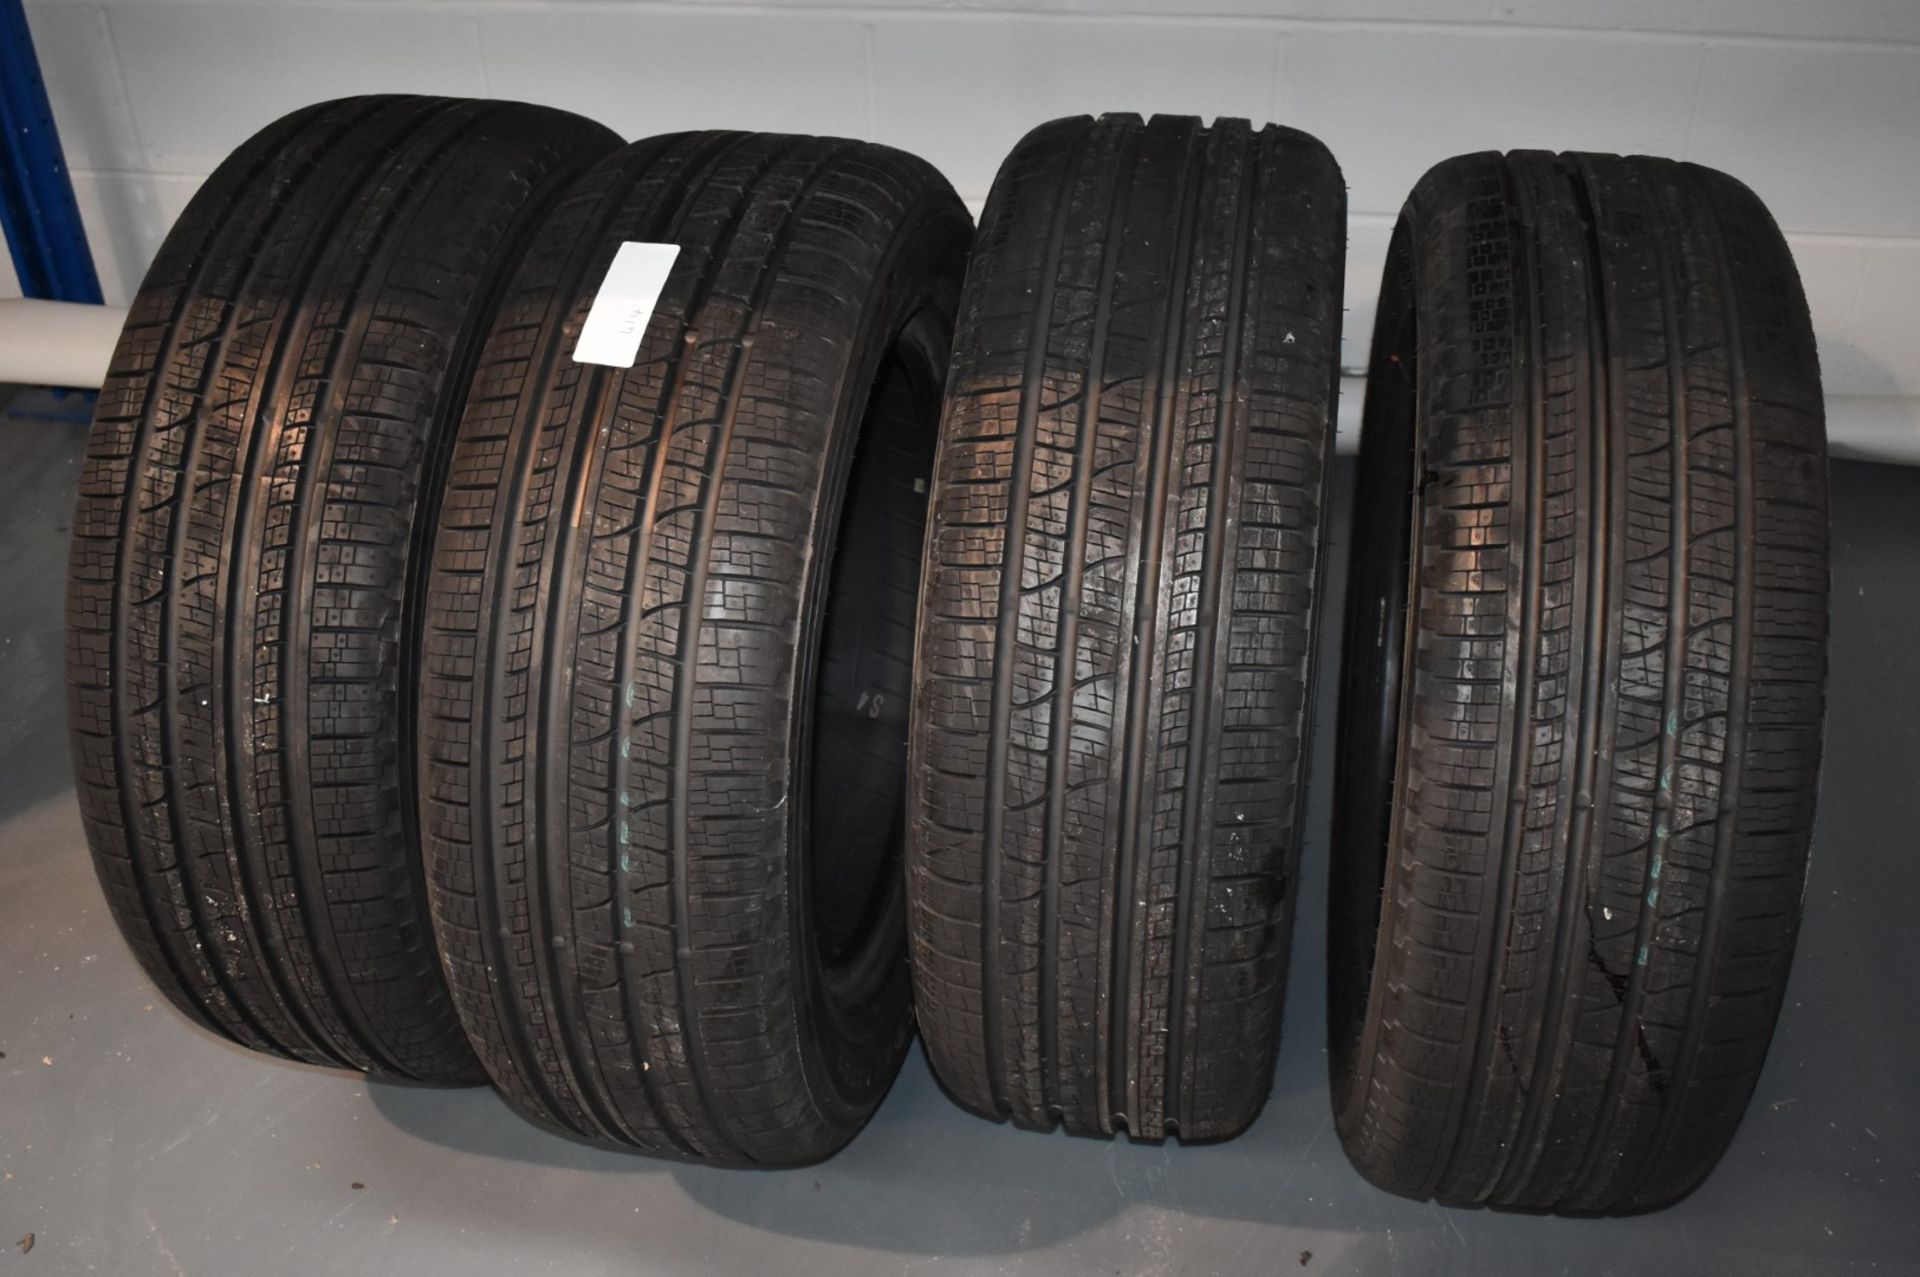 4 x Land Rover Discovery Sport Tyres - Pirelli Scorpion 235-60 R18 - Set of Four New and Unused